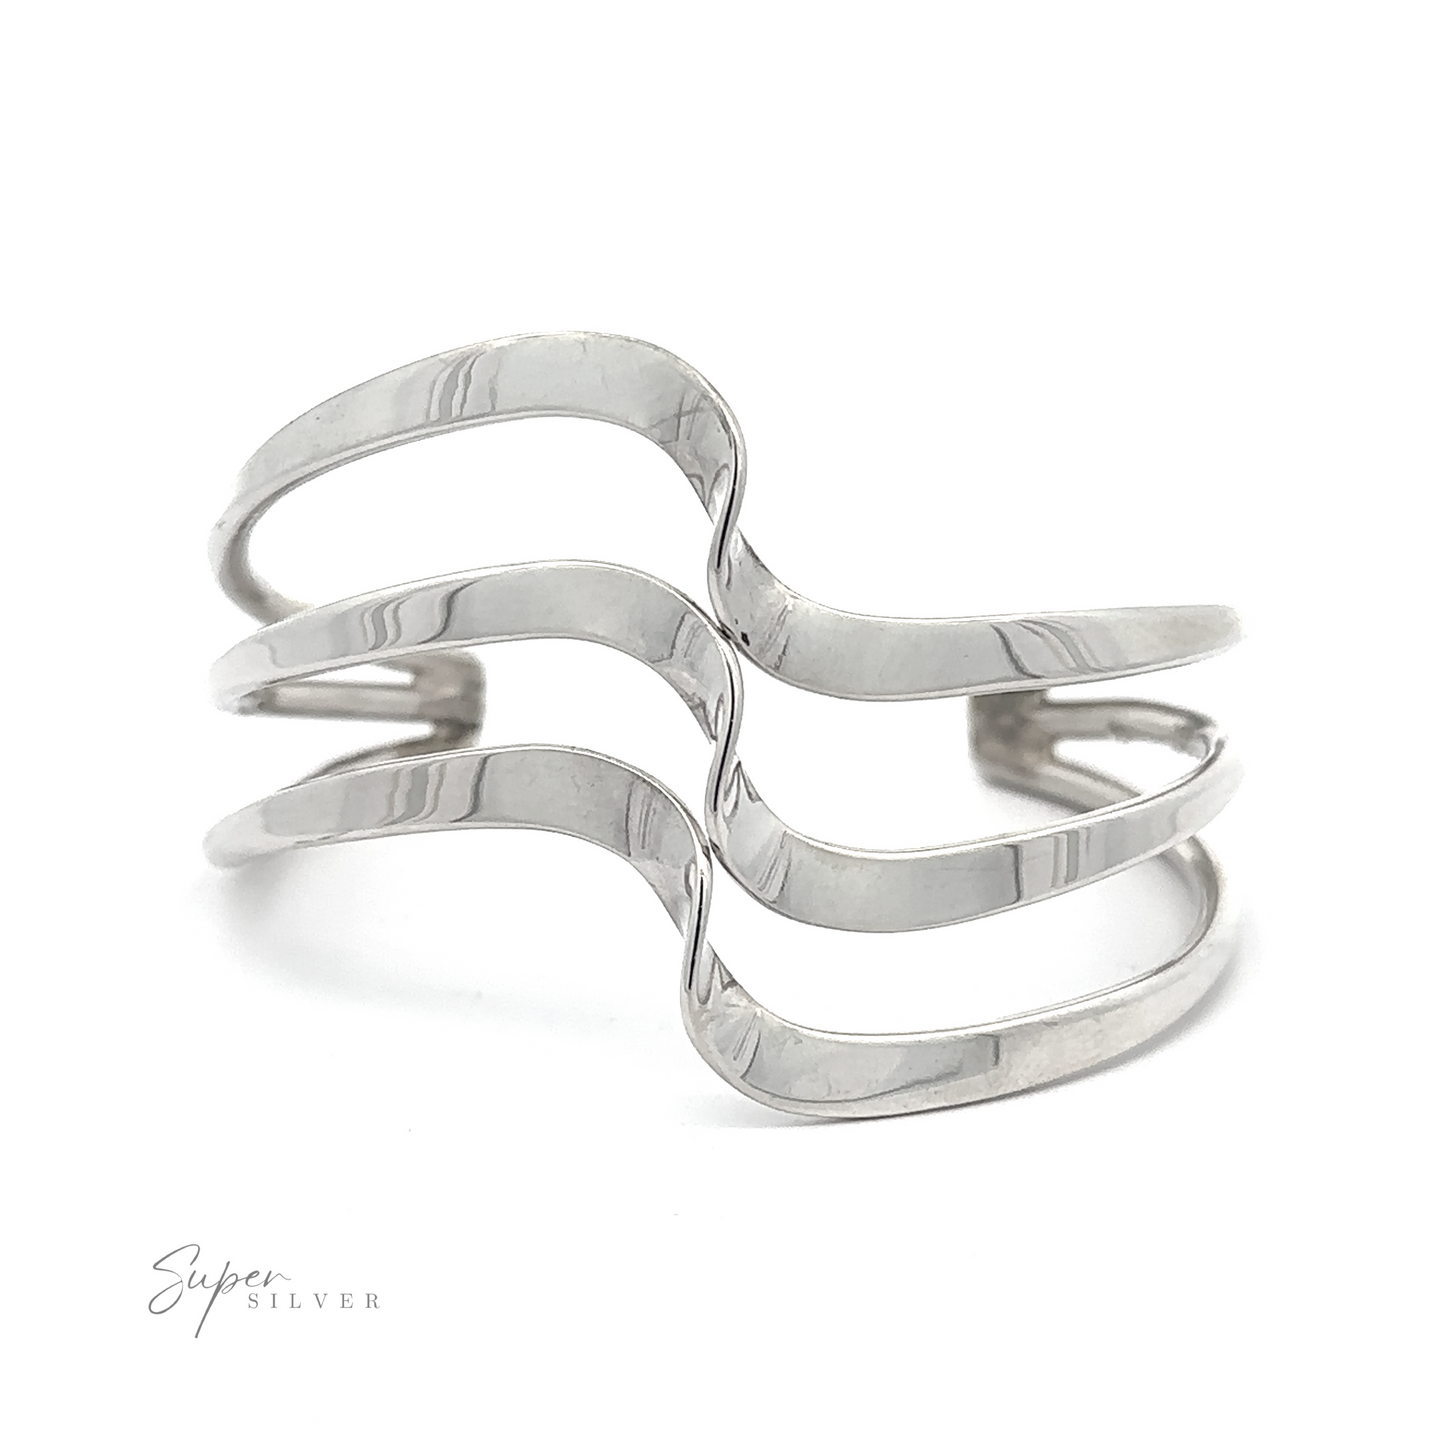 
                  
                    A Native American Handmade Silver Triple Wave Cuff featuring a wavy, open design with multiple parallel bands. The name "Super Silver" is printed in small text near the bottom left corner, perfect for a 6-7 inch wrist.
                  
                